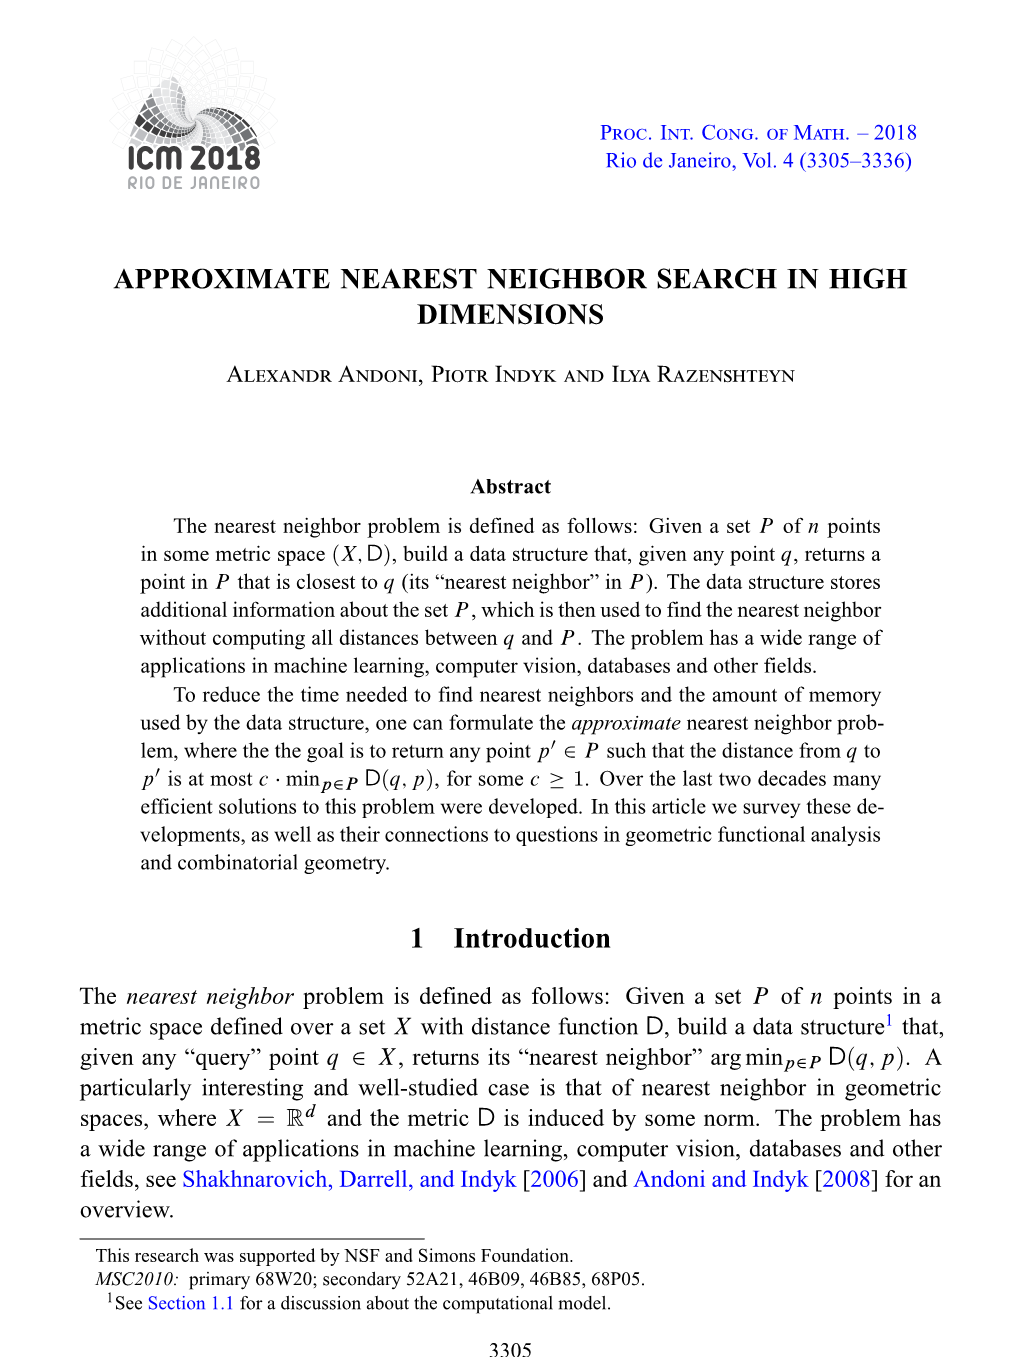 Approximate Nearest Neighbor Search in High Dimensions